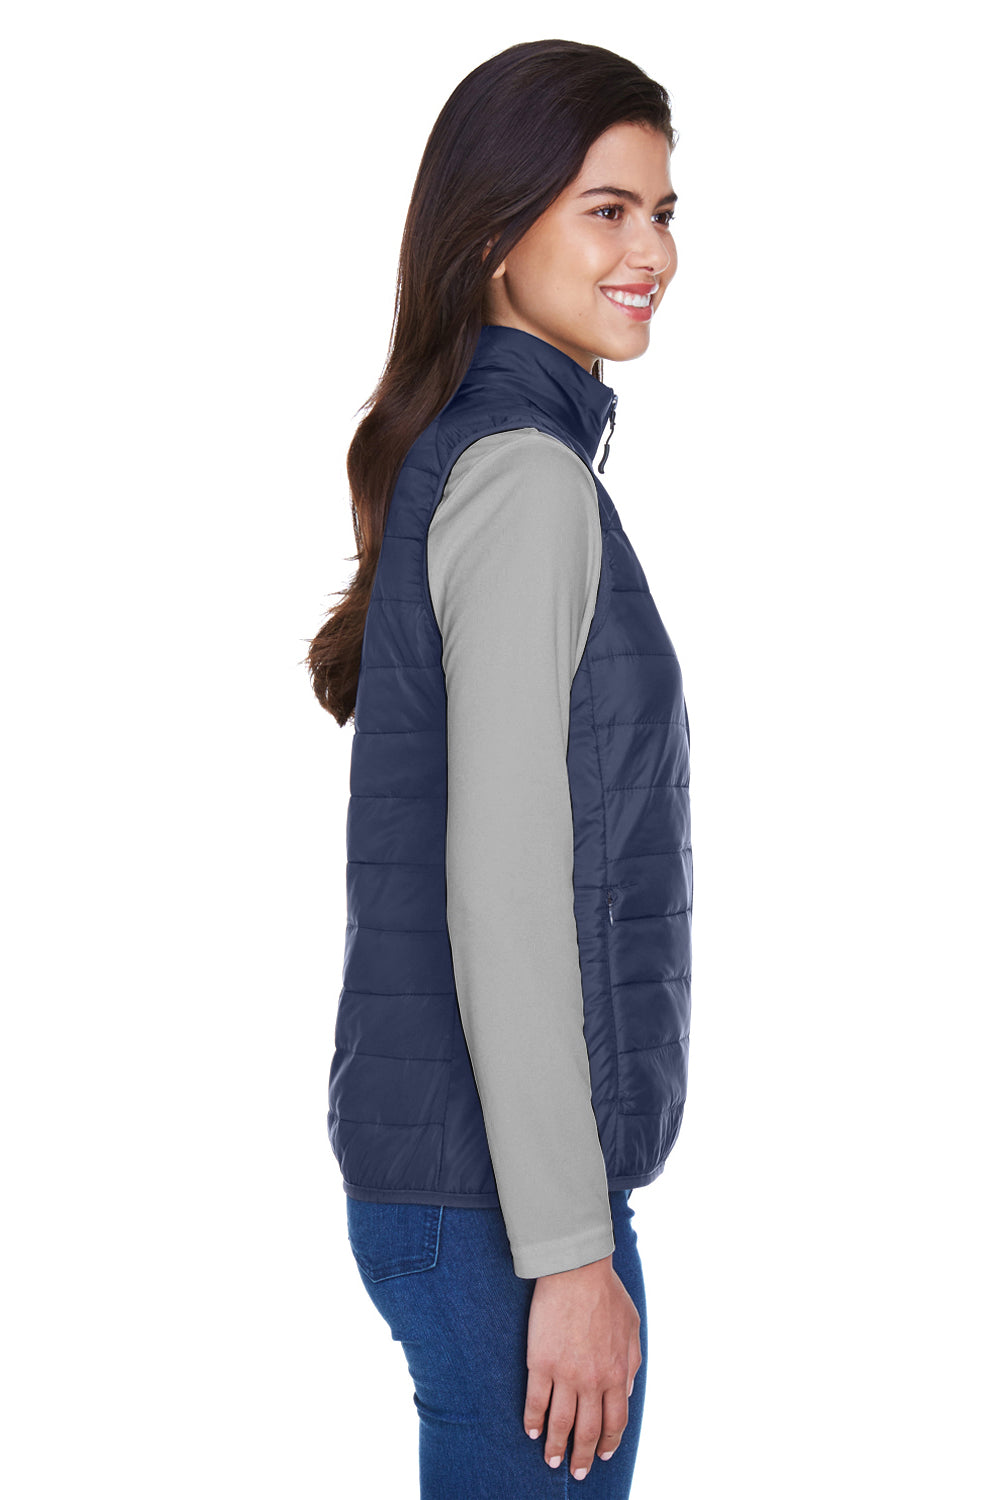 Core 365 CE702W Womens Prevail Packable Puffer Water Resistant Full Zip Vest Navy Blue Side